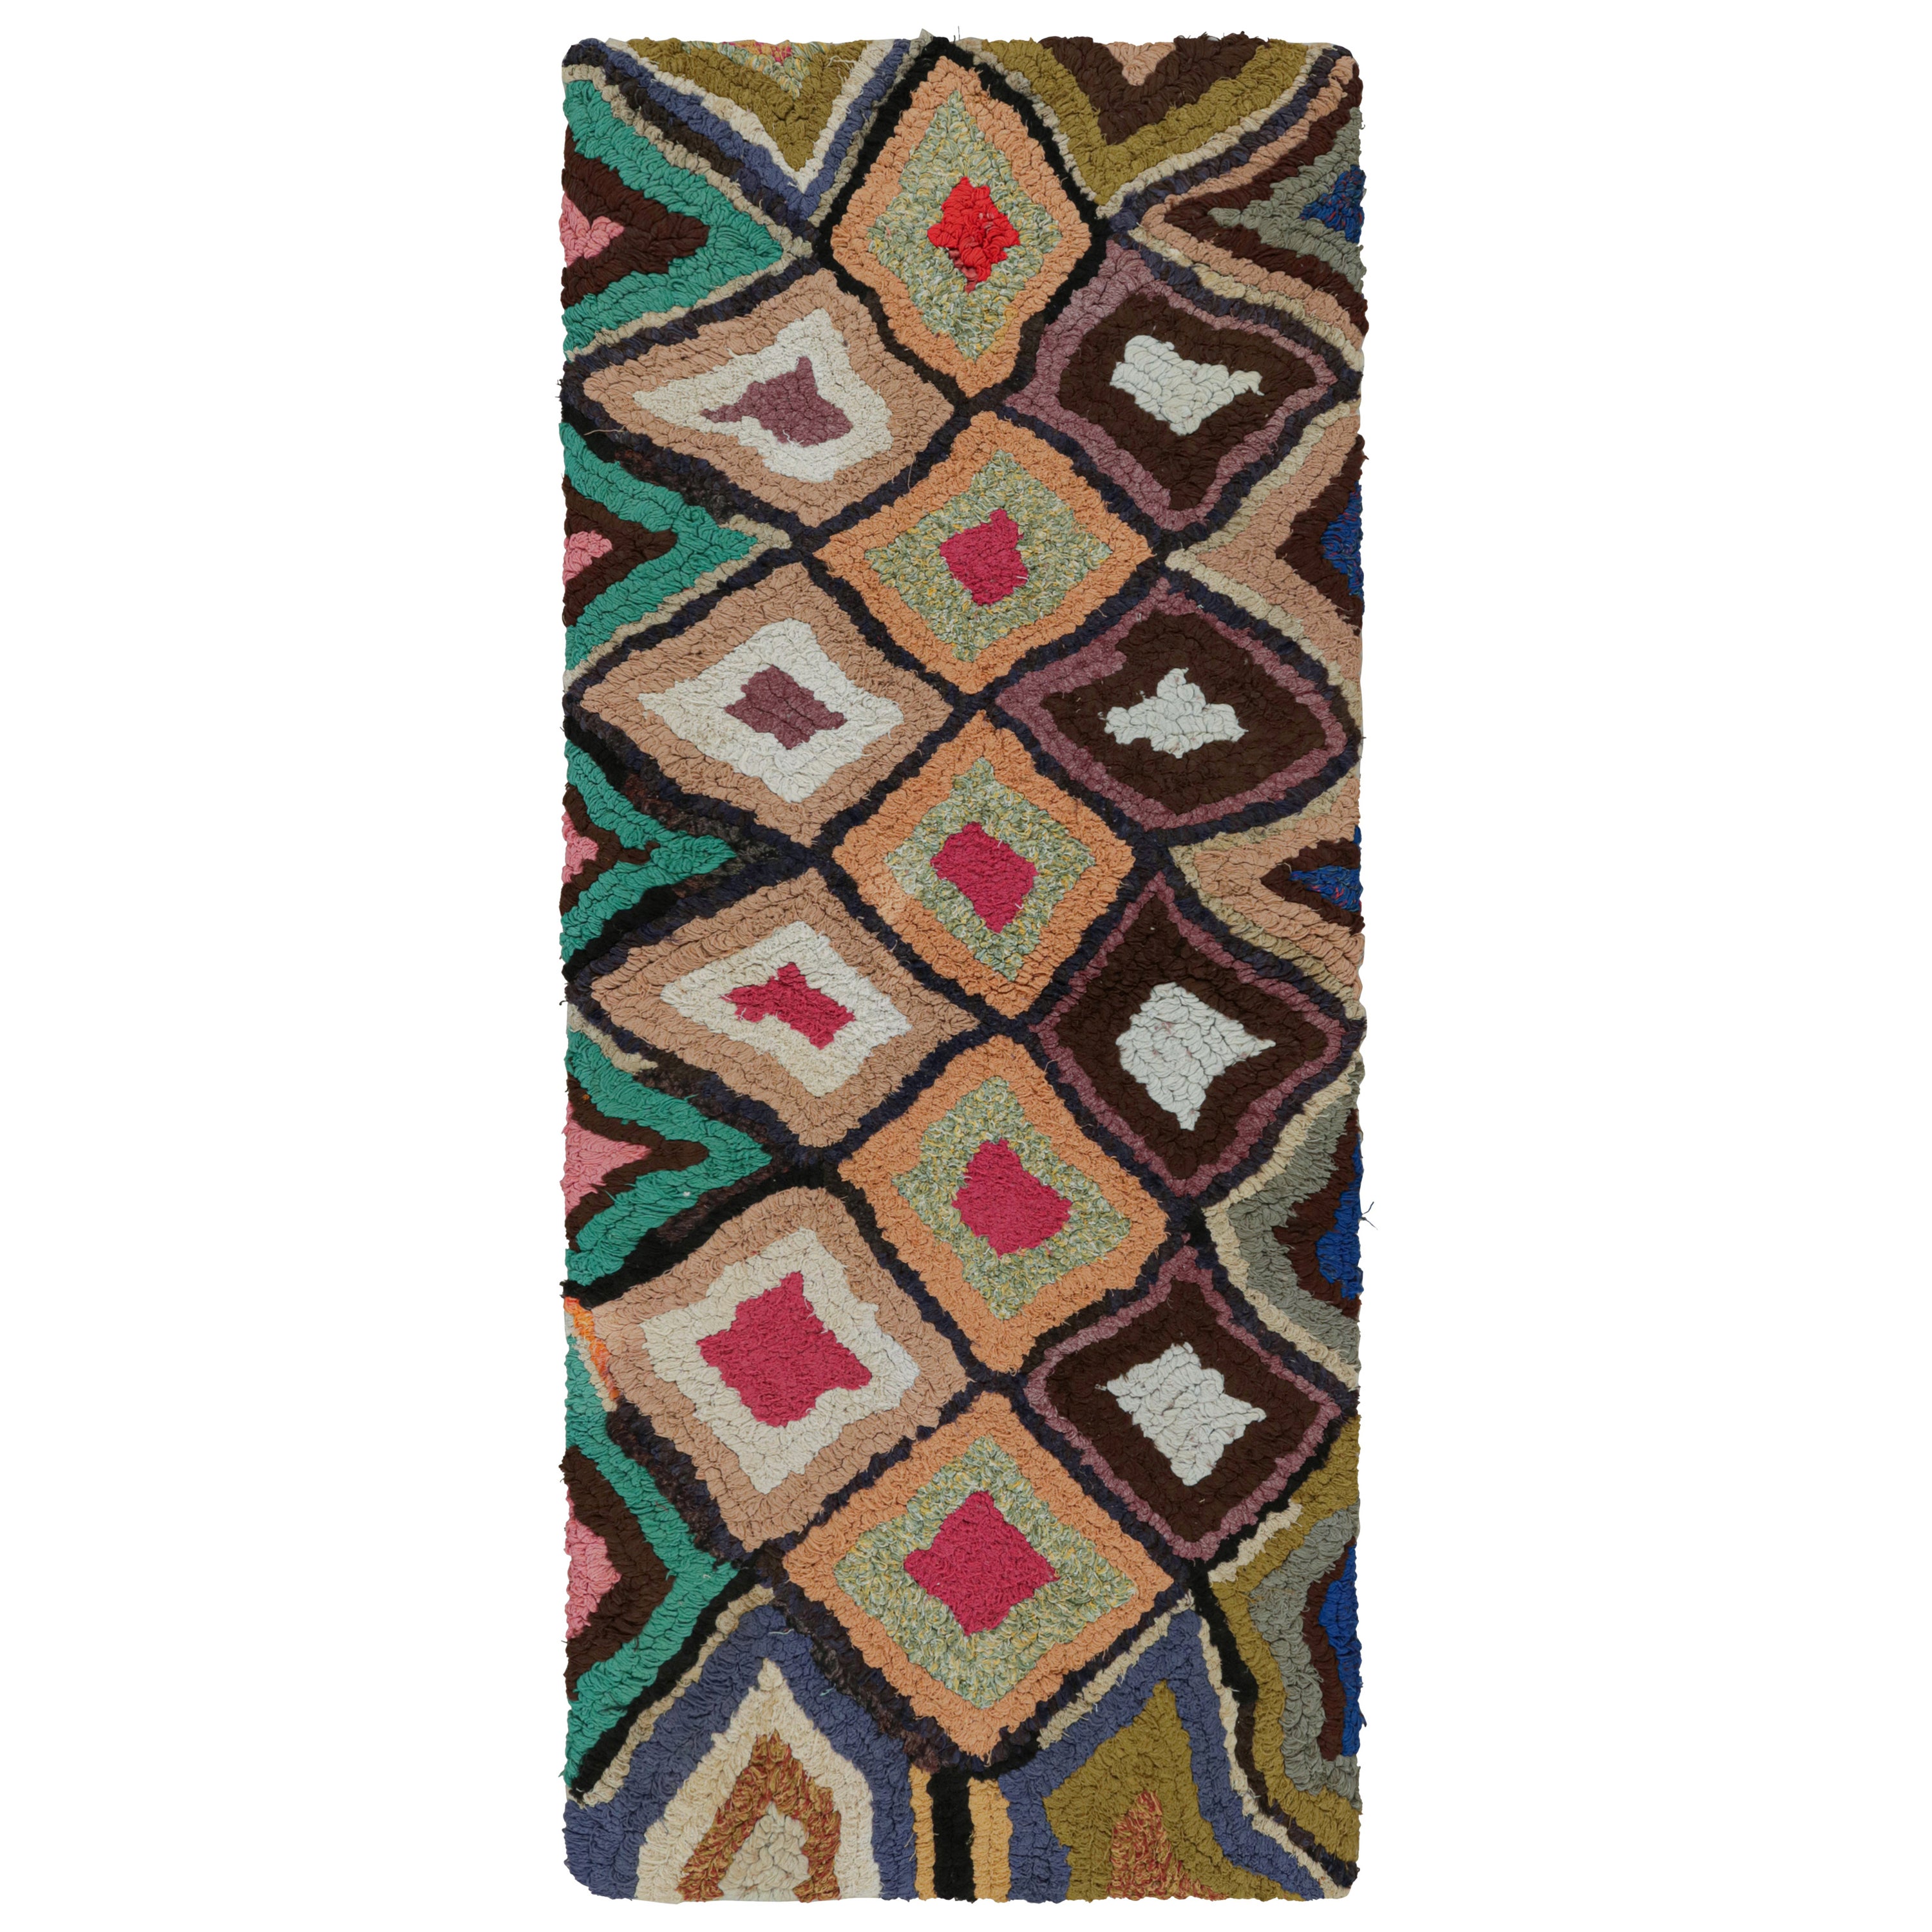 Vintage Azilal Moroccan Style Runner Rug, with Patterns from Rug & Kilim For Sale